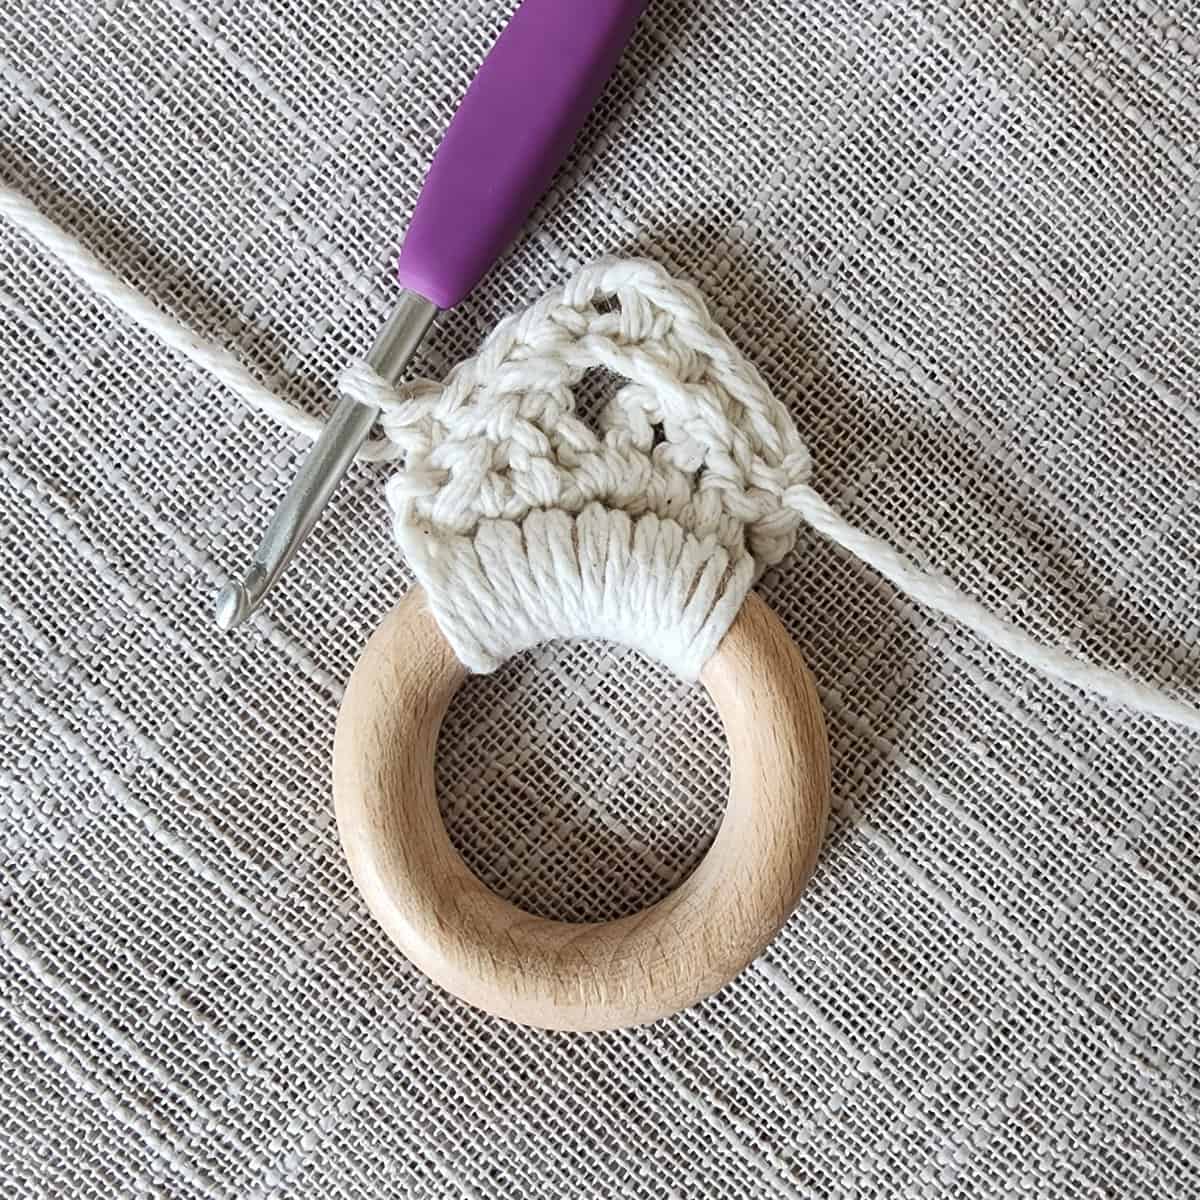 Small wooden ring with single crochet around and hanging strap being started.